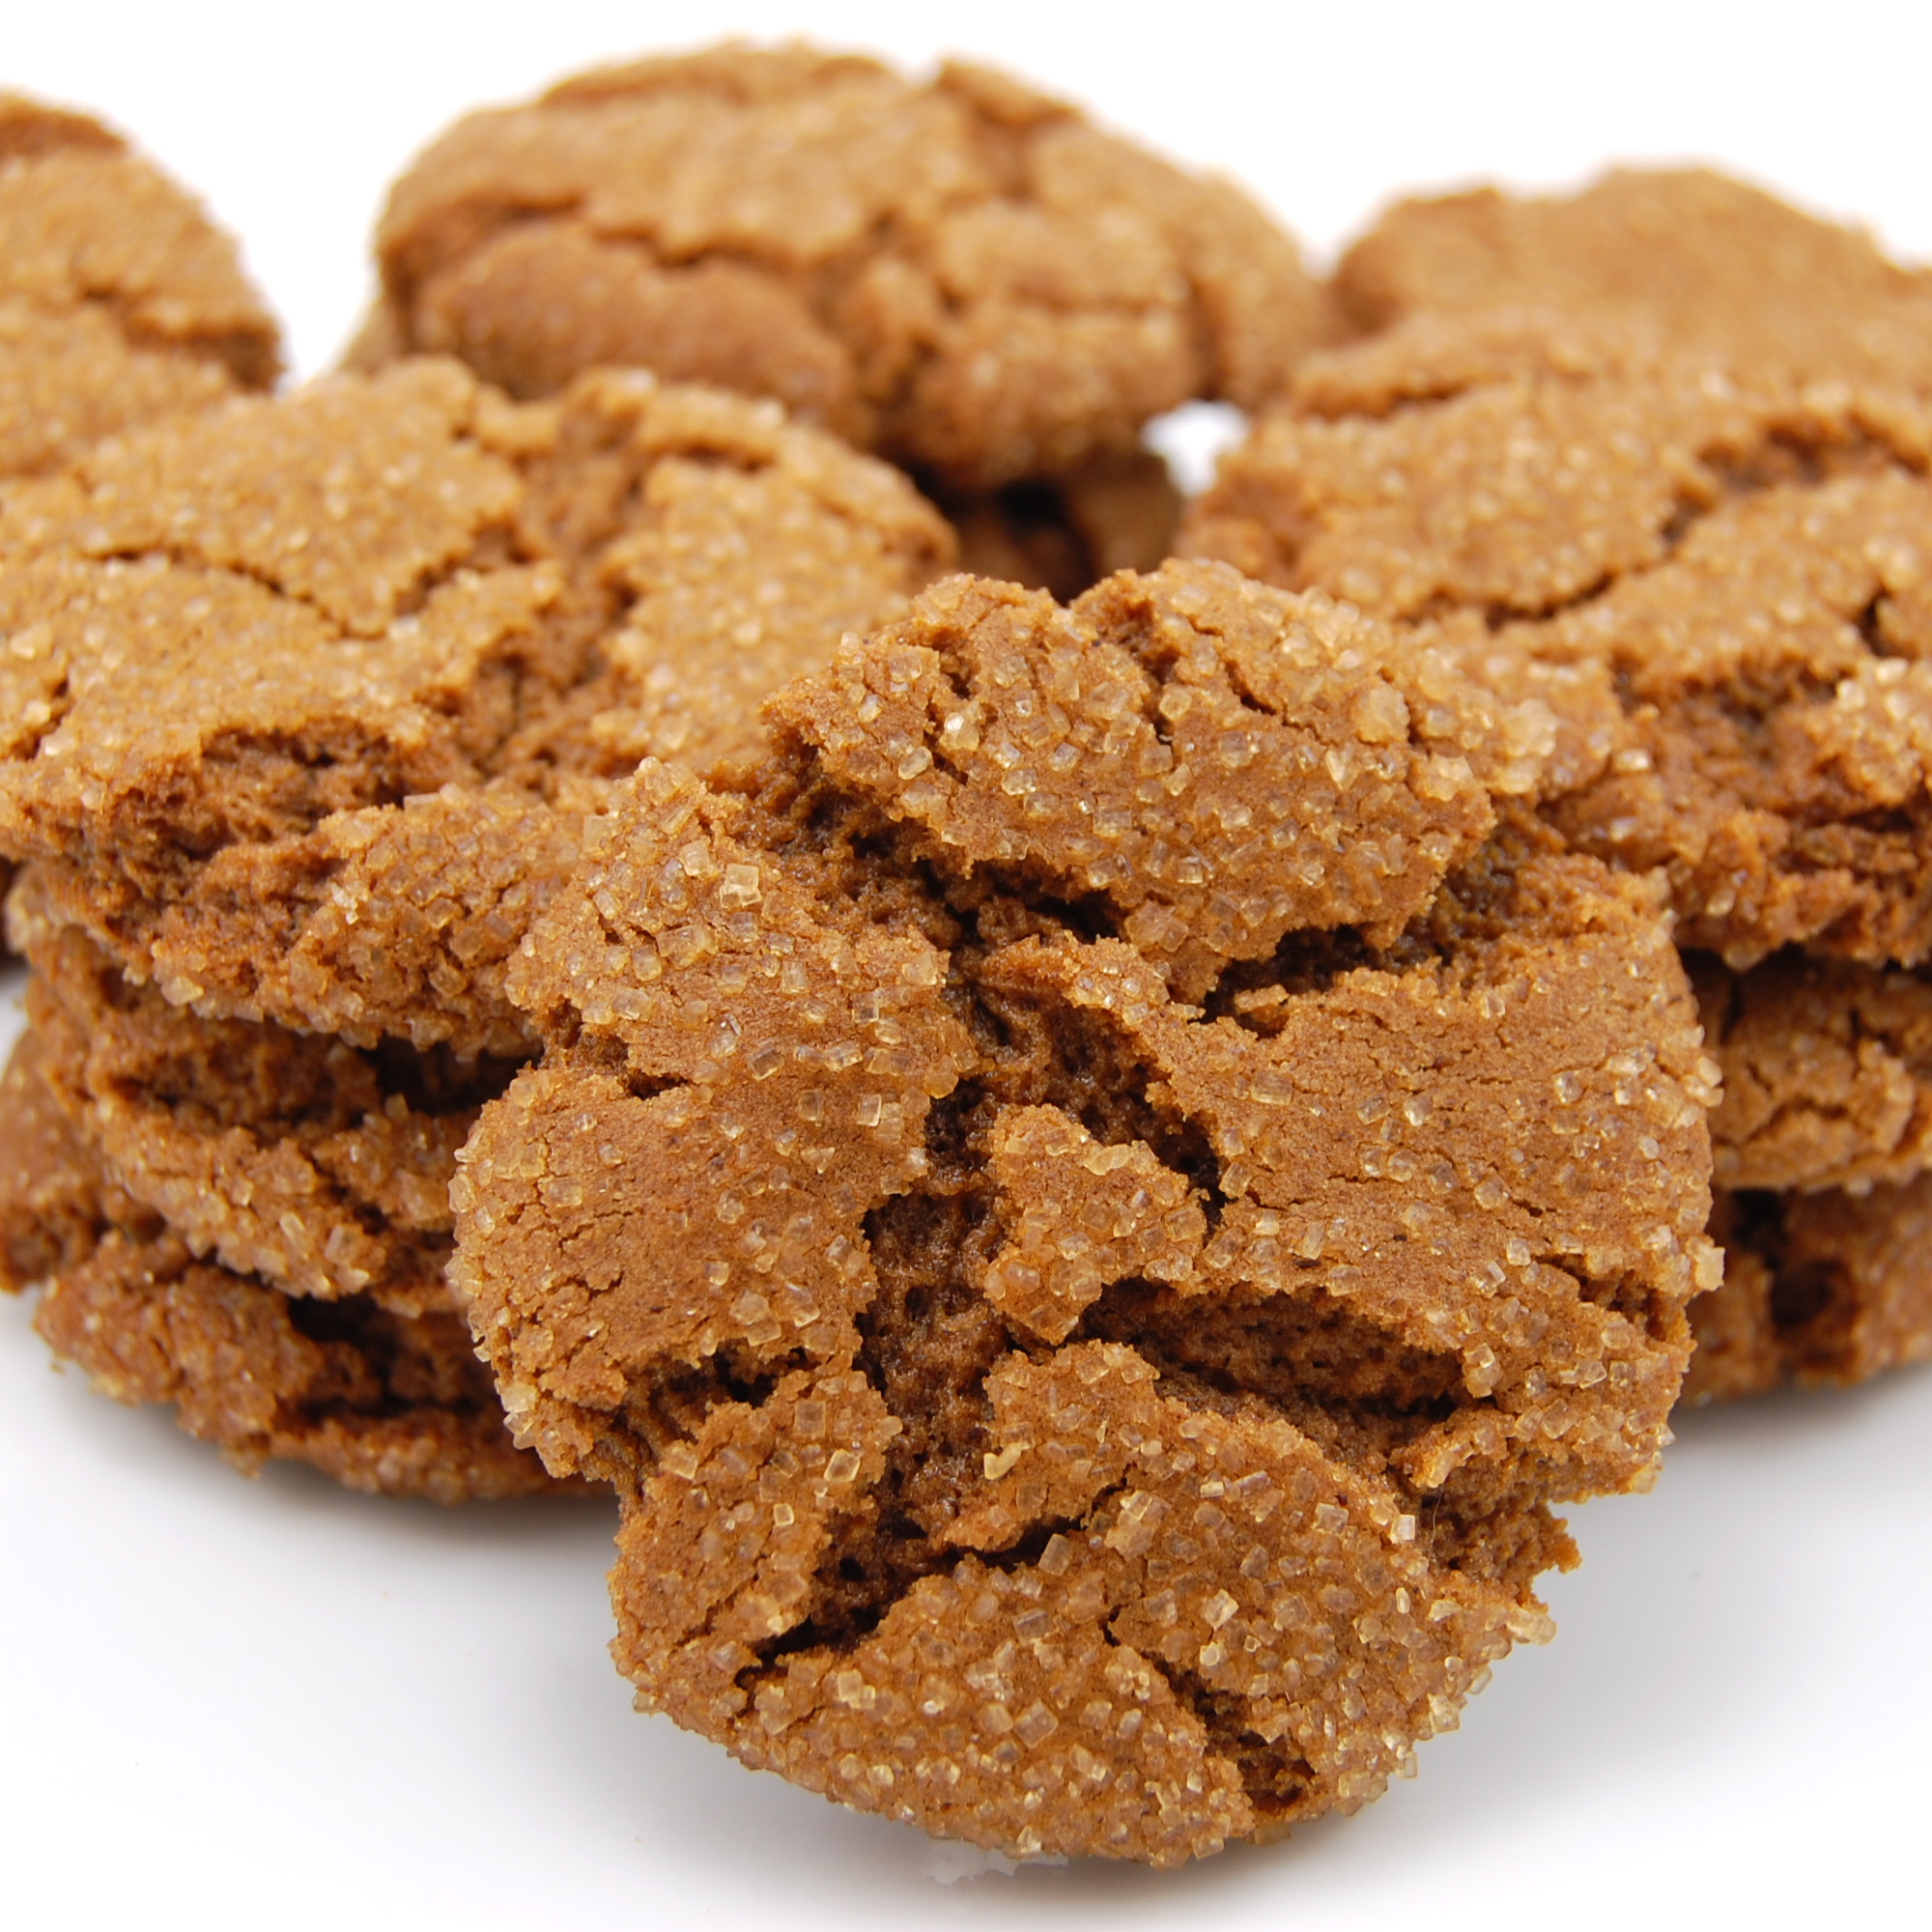 What are some recipes for ginger snap cookies?